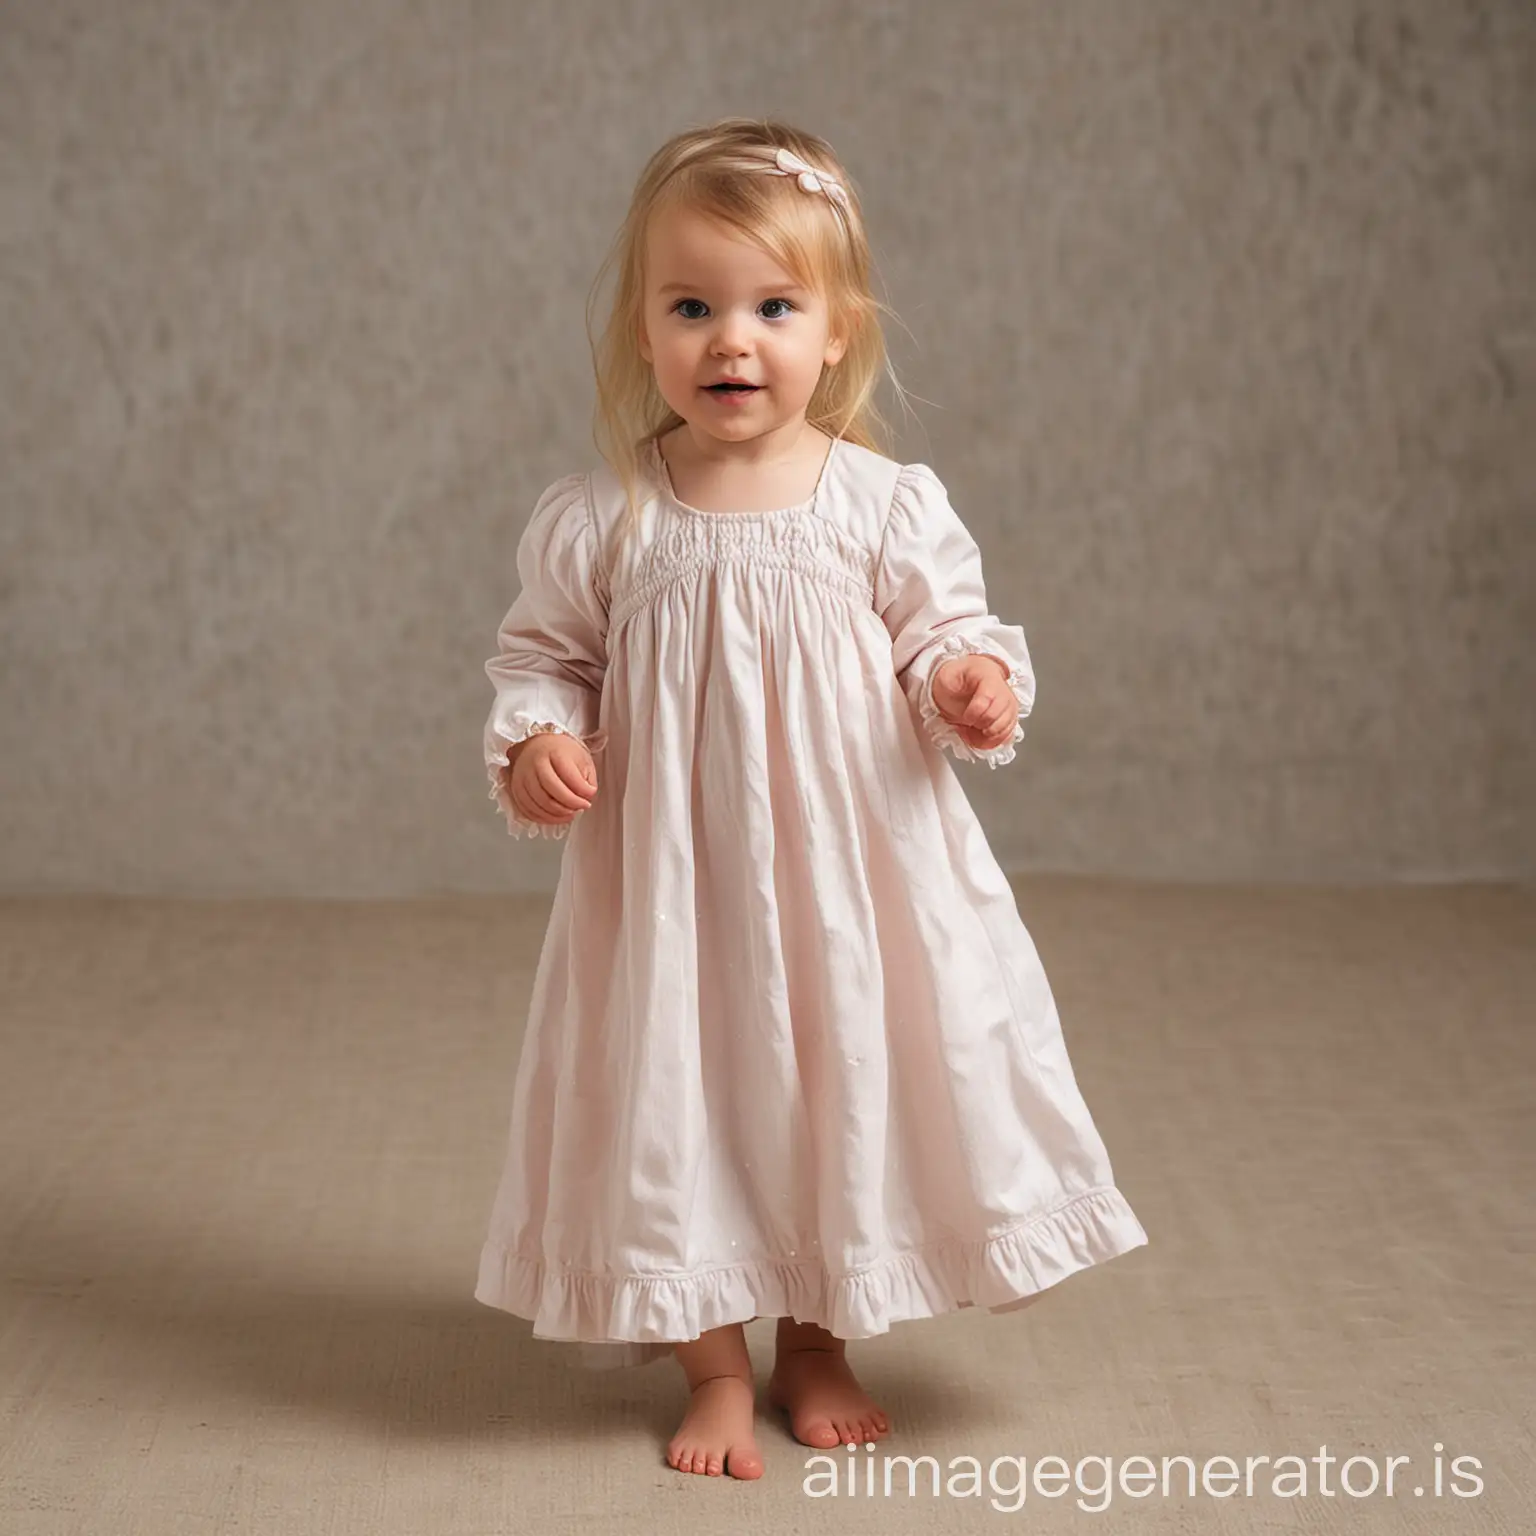 Cute-Baby-Girl-Standing-in-Dress-Gown